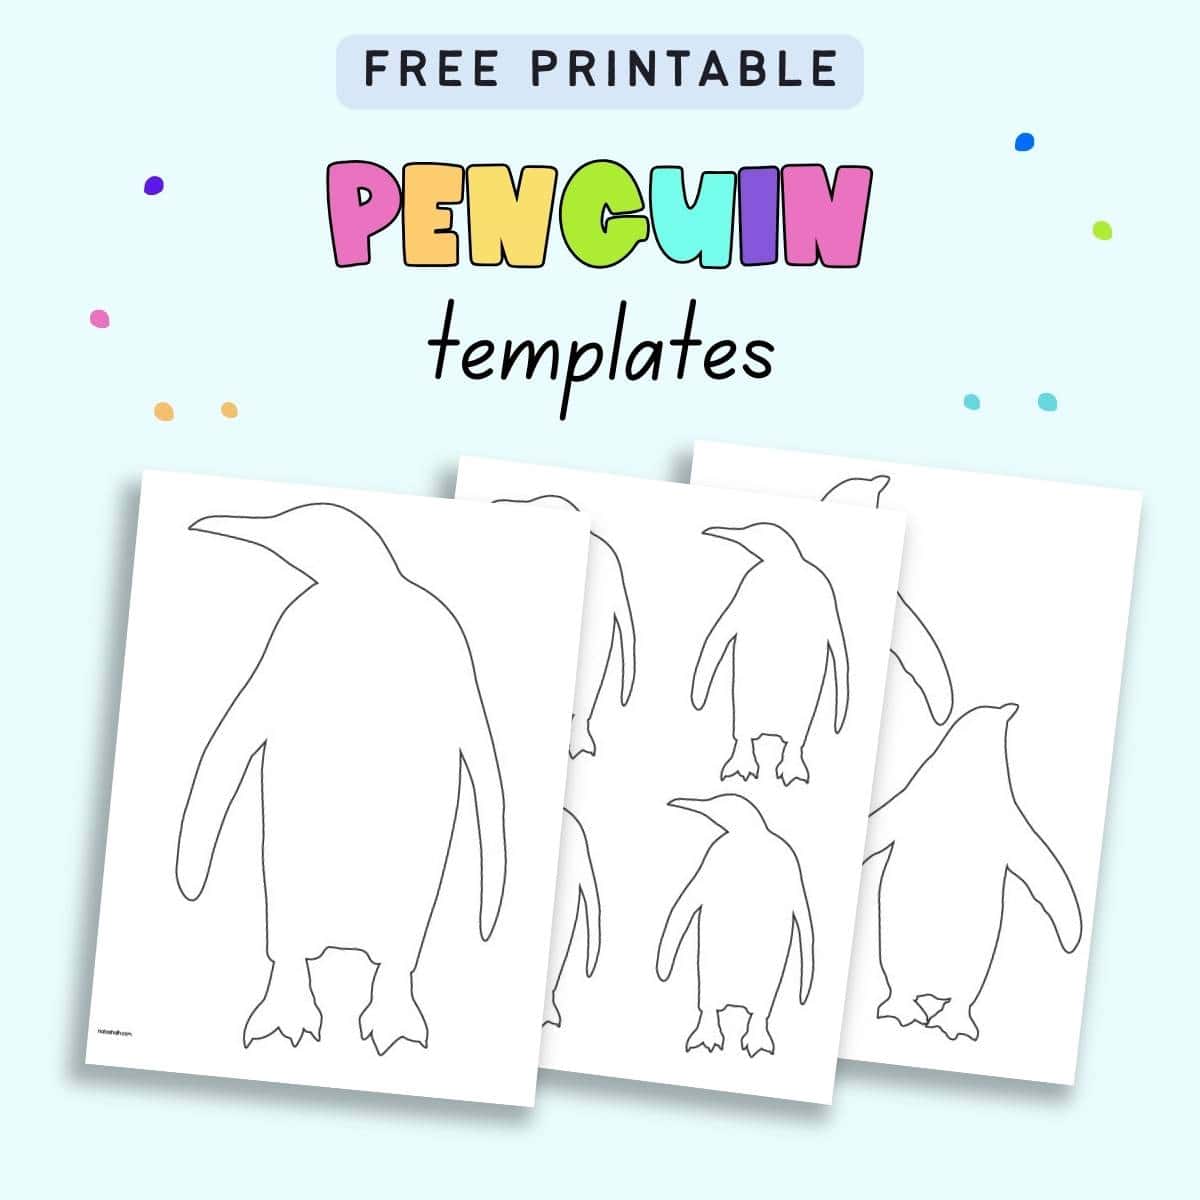 Text "see printable penguin templates" with a preview of three pages of penguin outline template